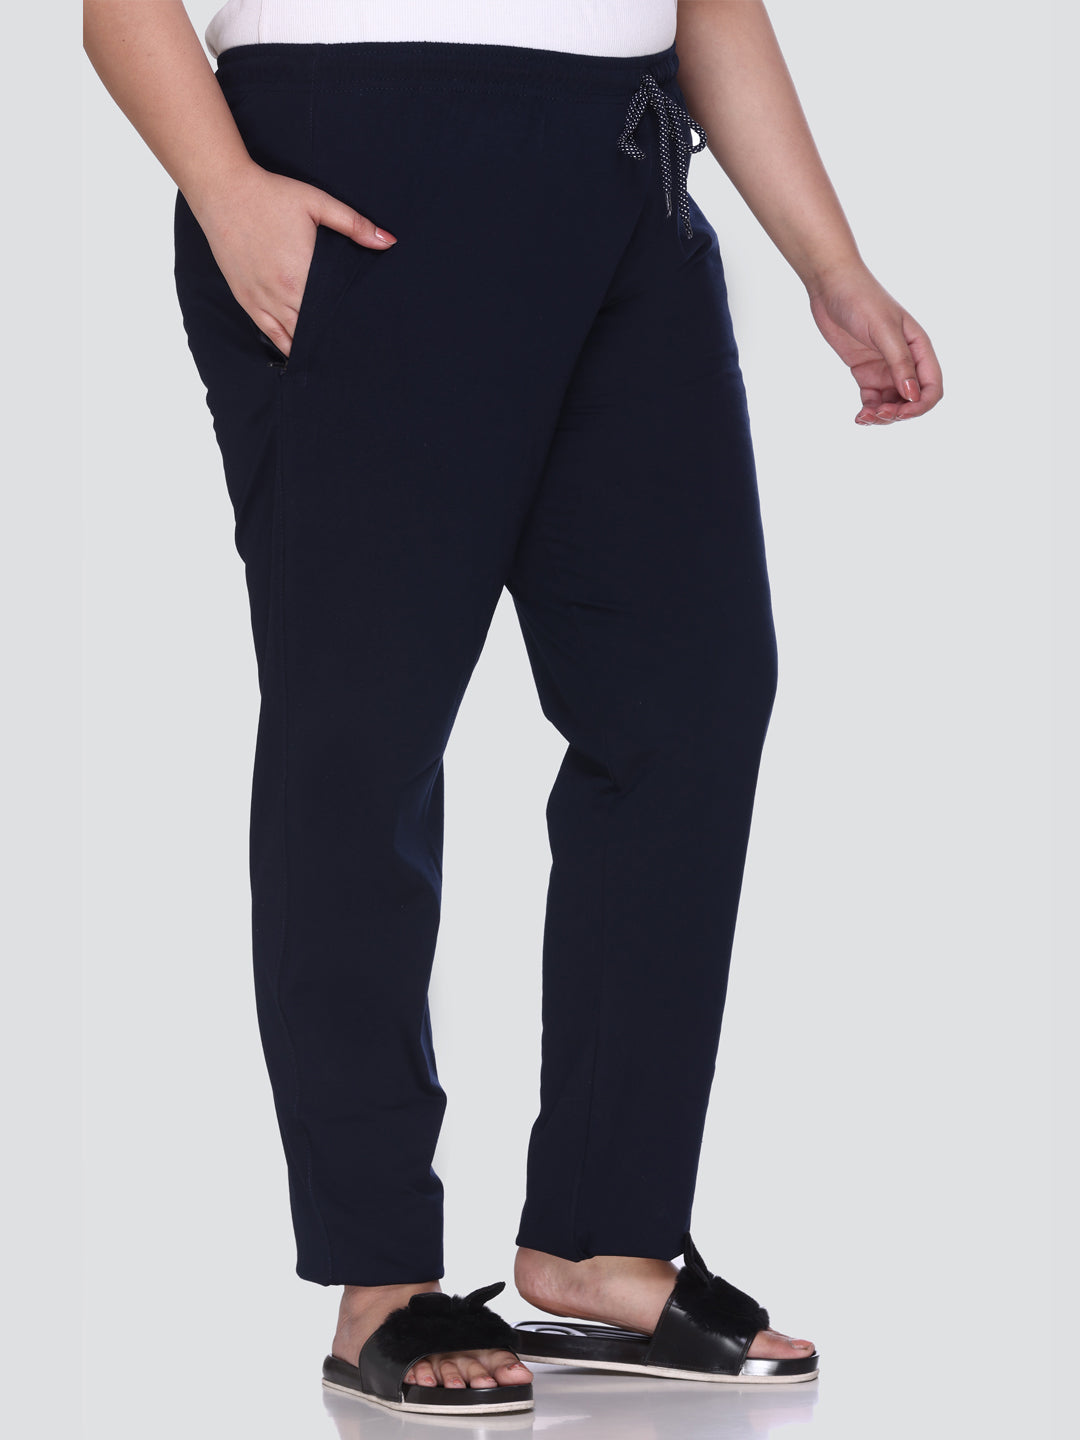 Comfy Navy Blue Cotton Track Pants For Women At Best Prices